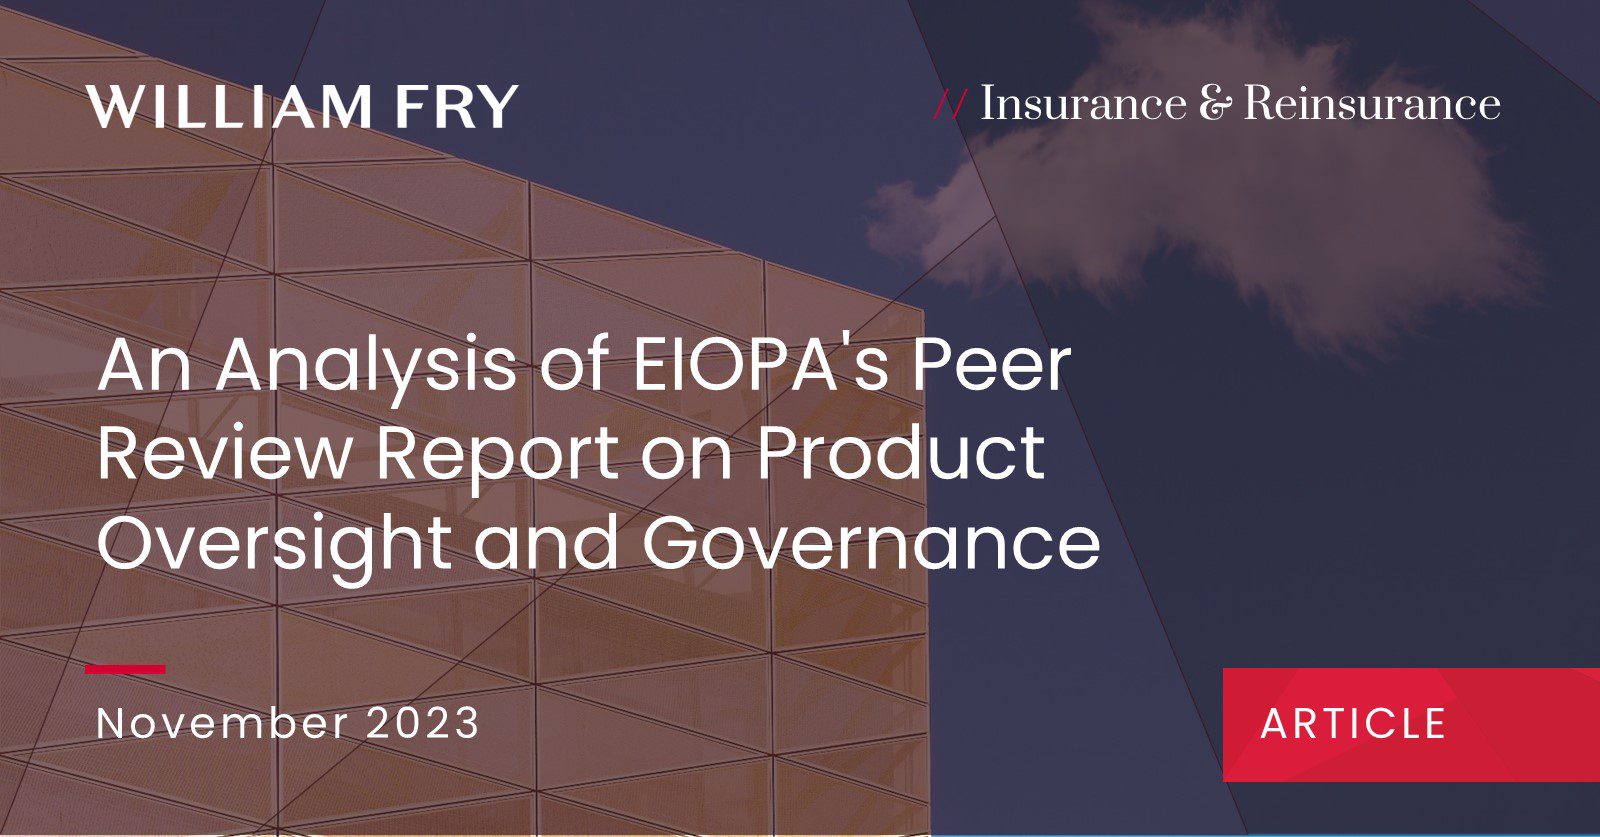 An Analysis of EIOPA's Peer Review Report on Product Oversight and Governance